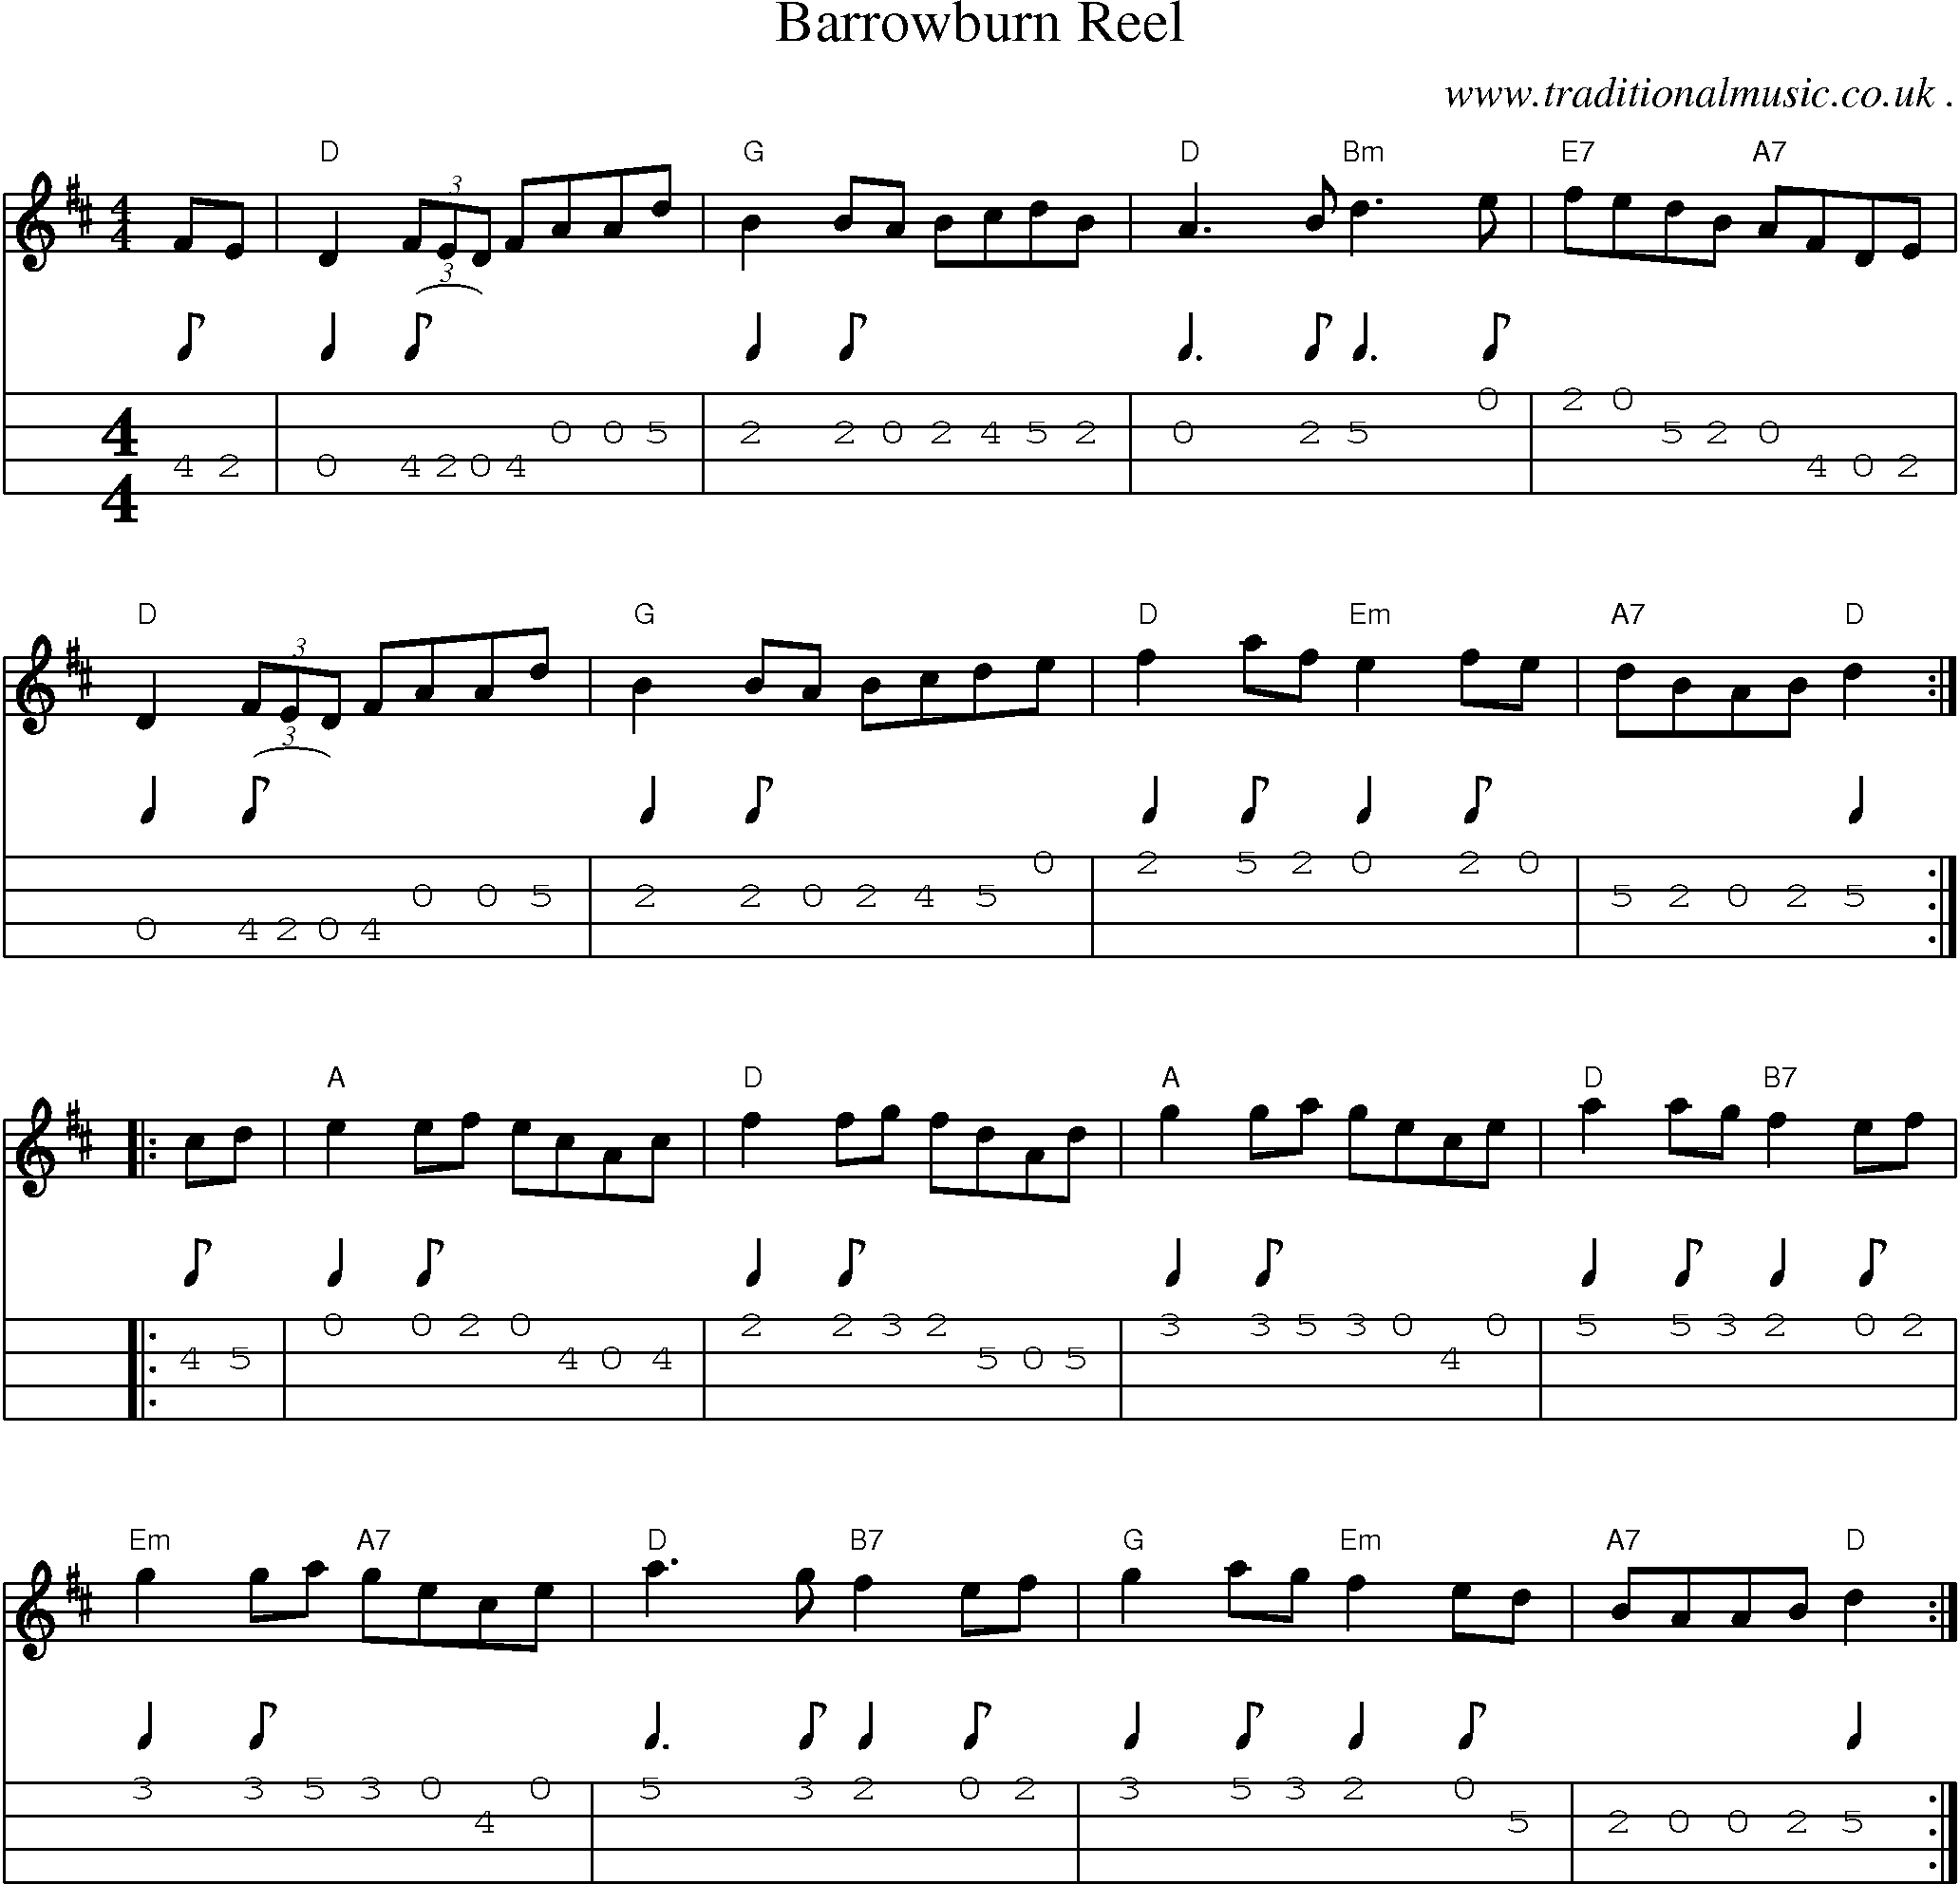 Music Score and Guitar Tabs for Barrowburn Reel